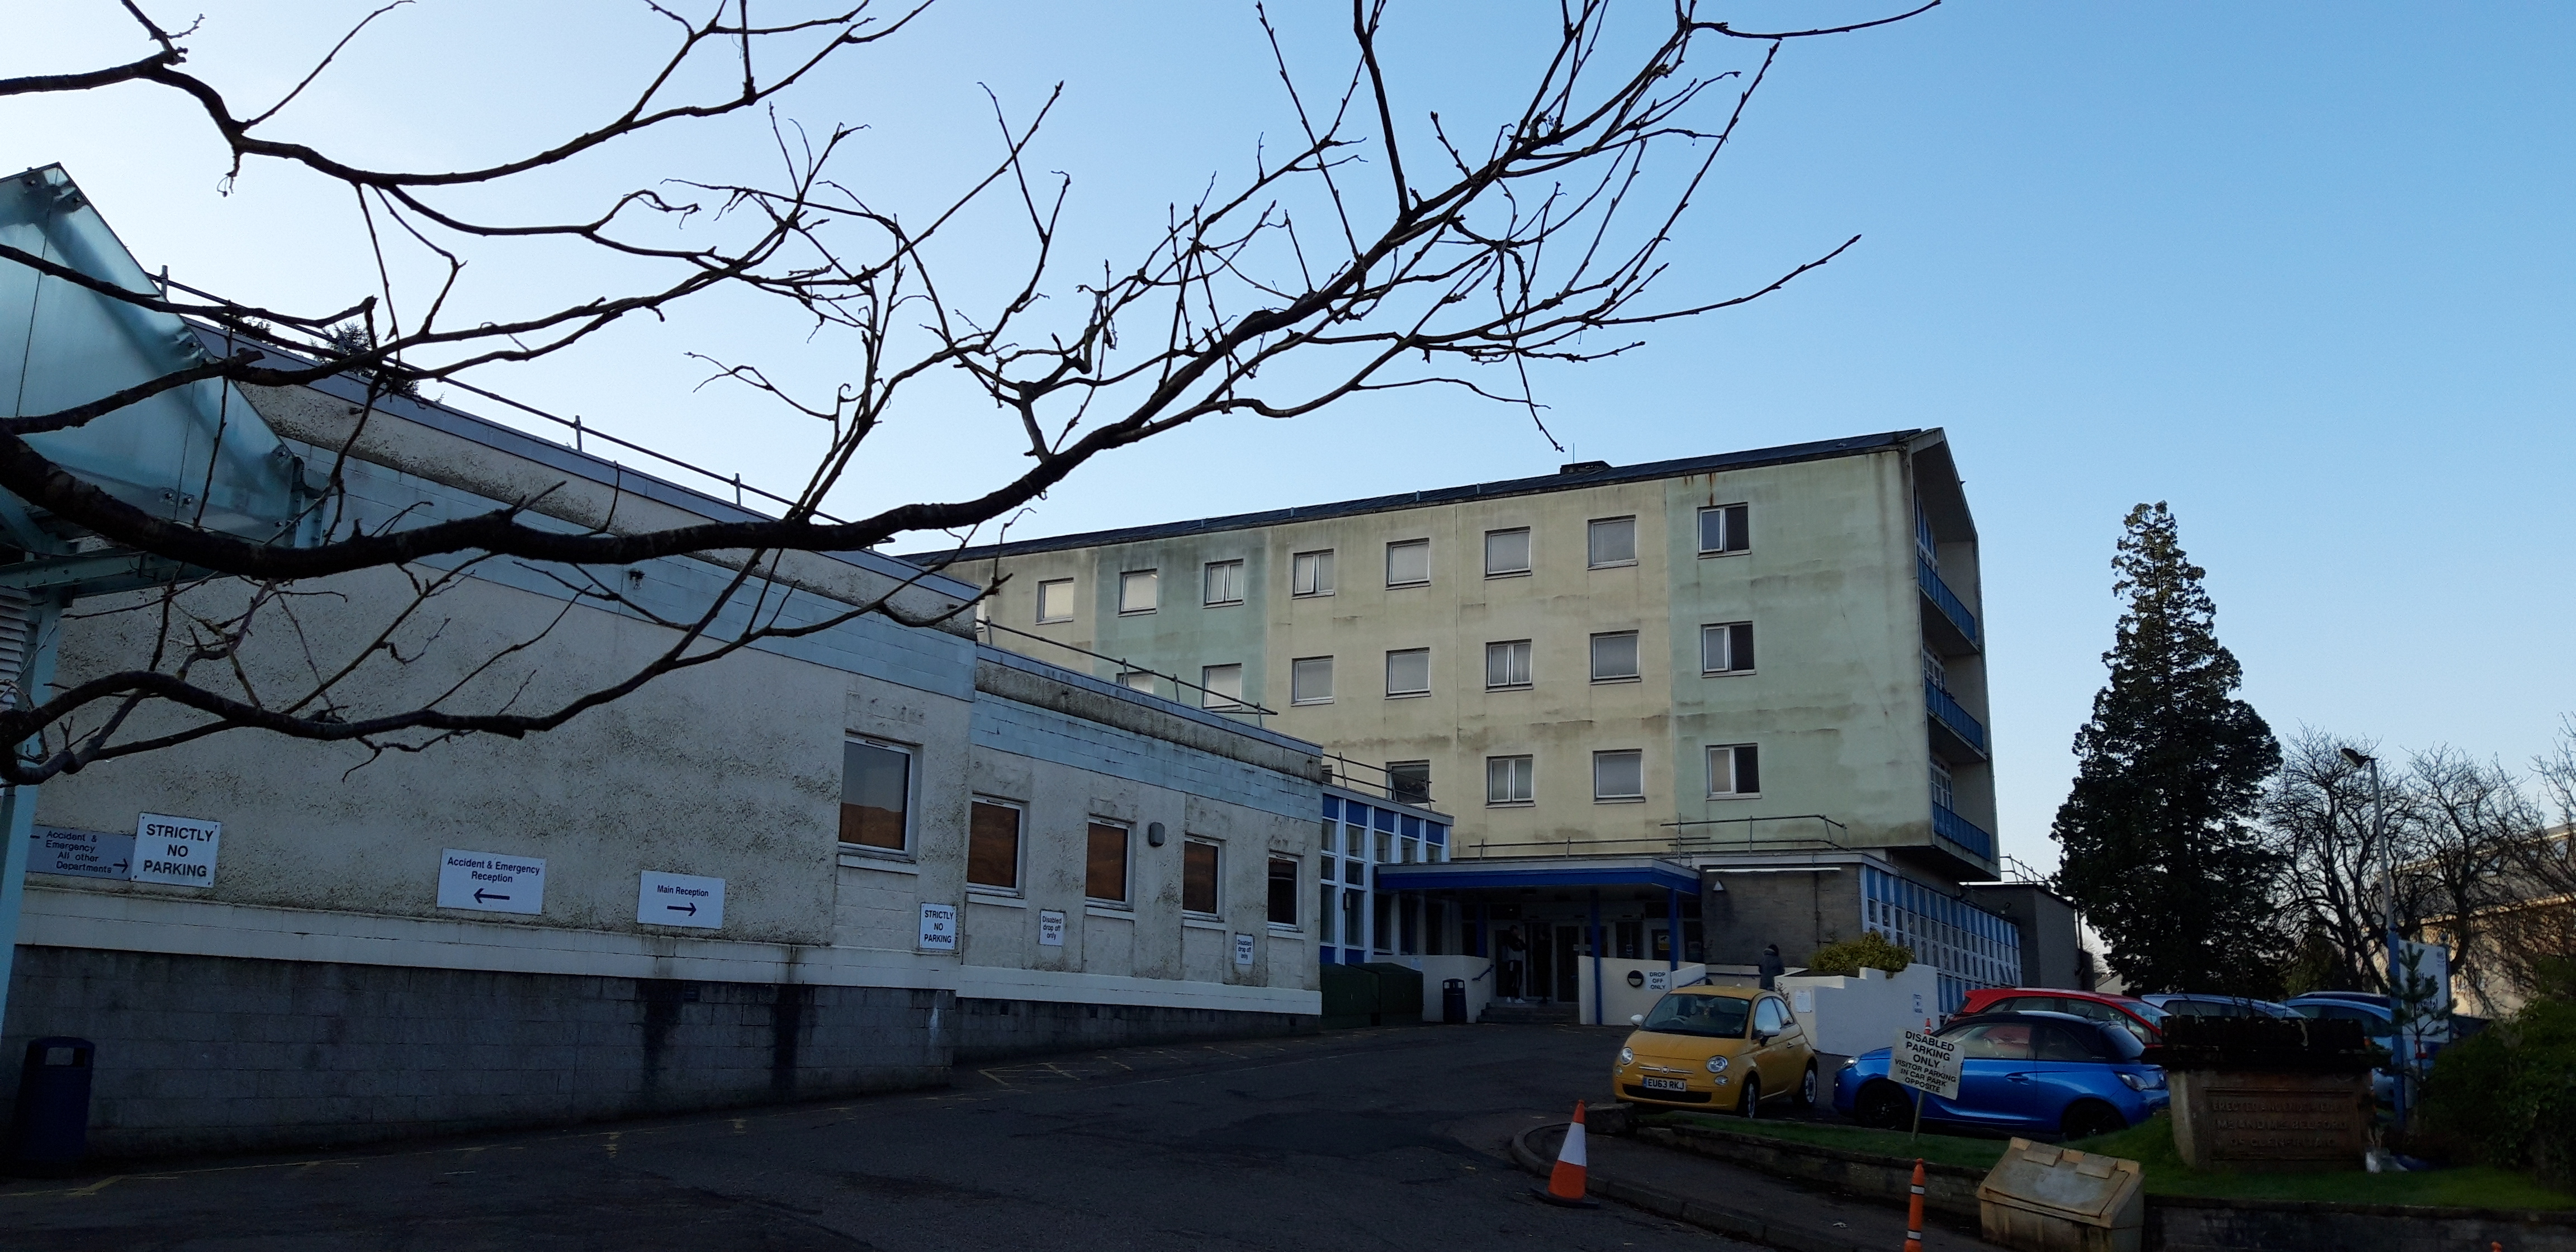 When will it be rebuilt? Belford Hospital "on track" for 2023 rebuild.